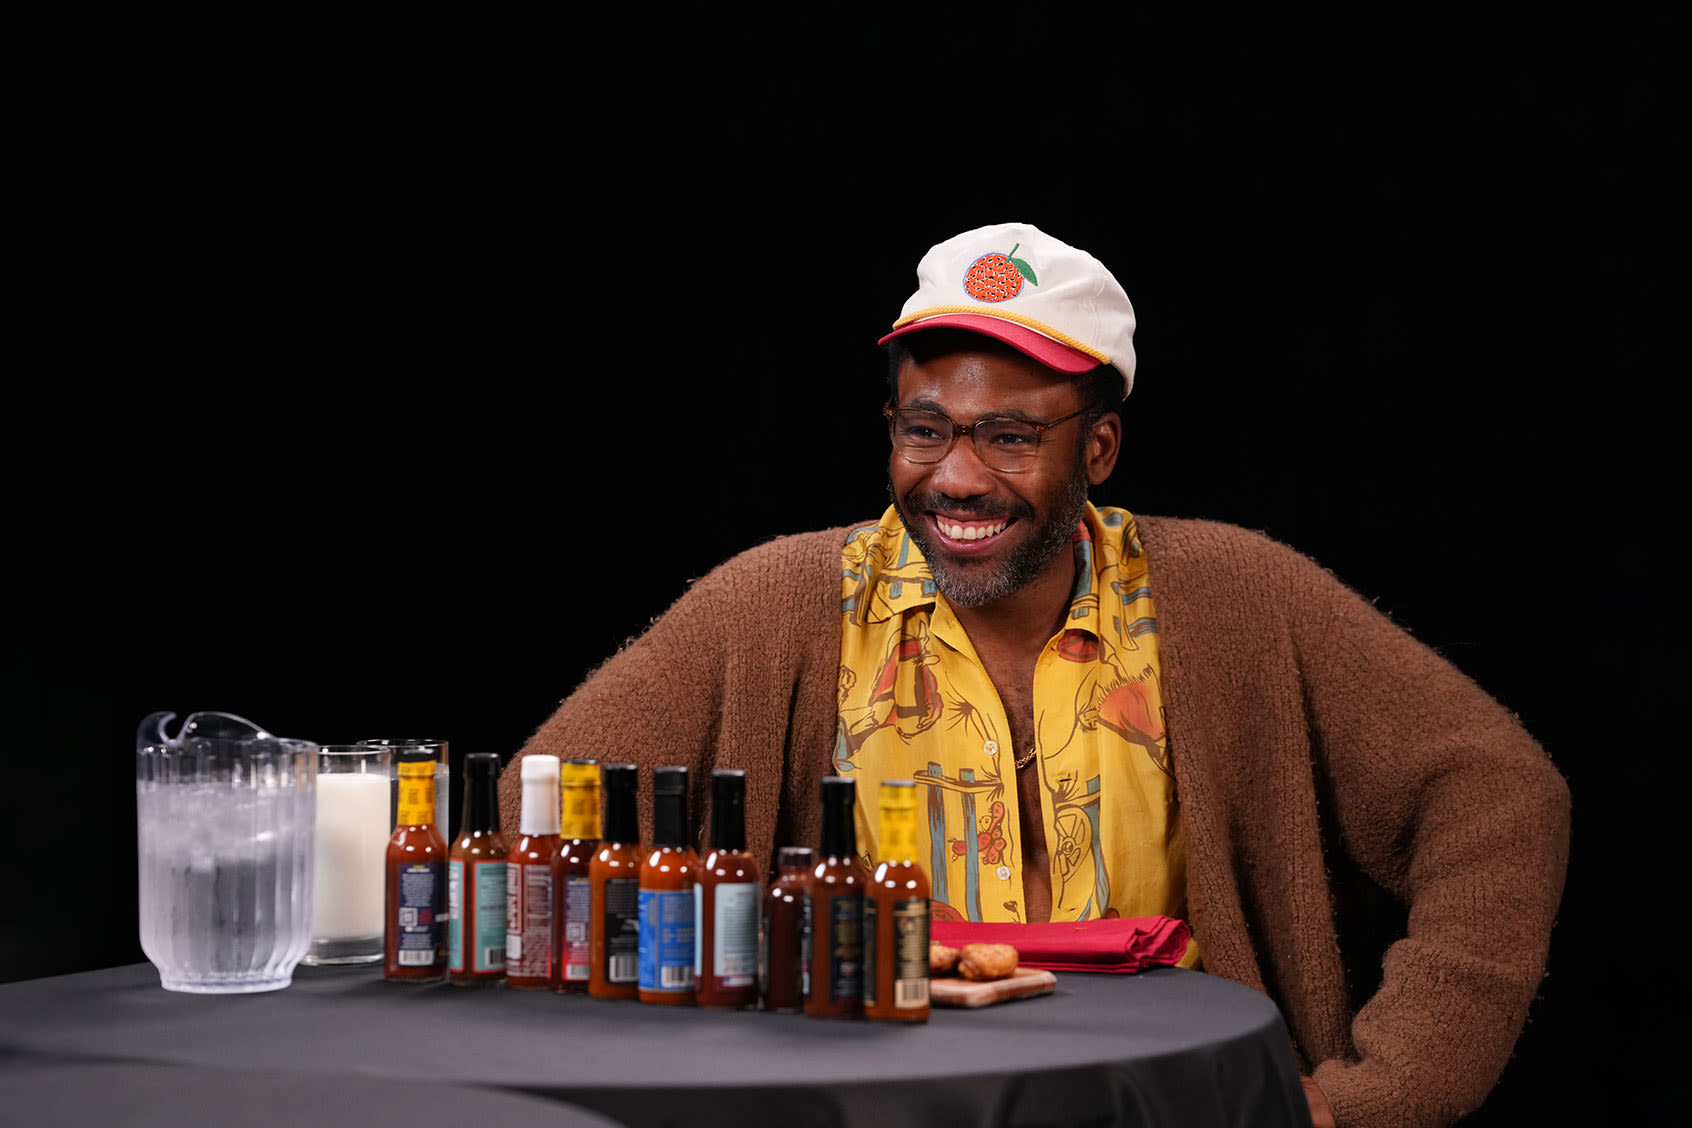 “Hot Ones”: Donald Glover bids adieu to Childish Gambino moniker while feasting on spicy wings